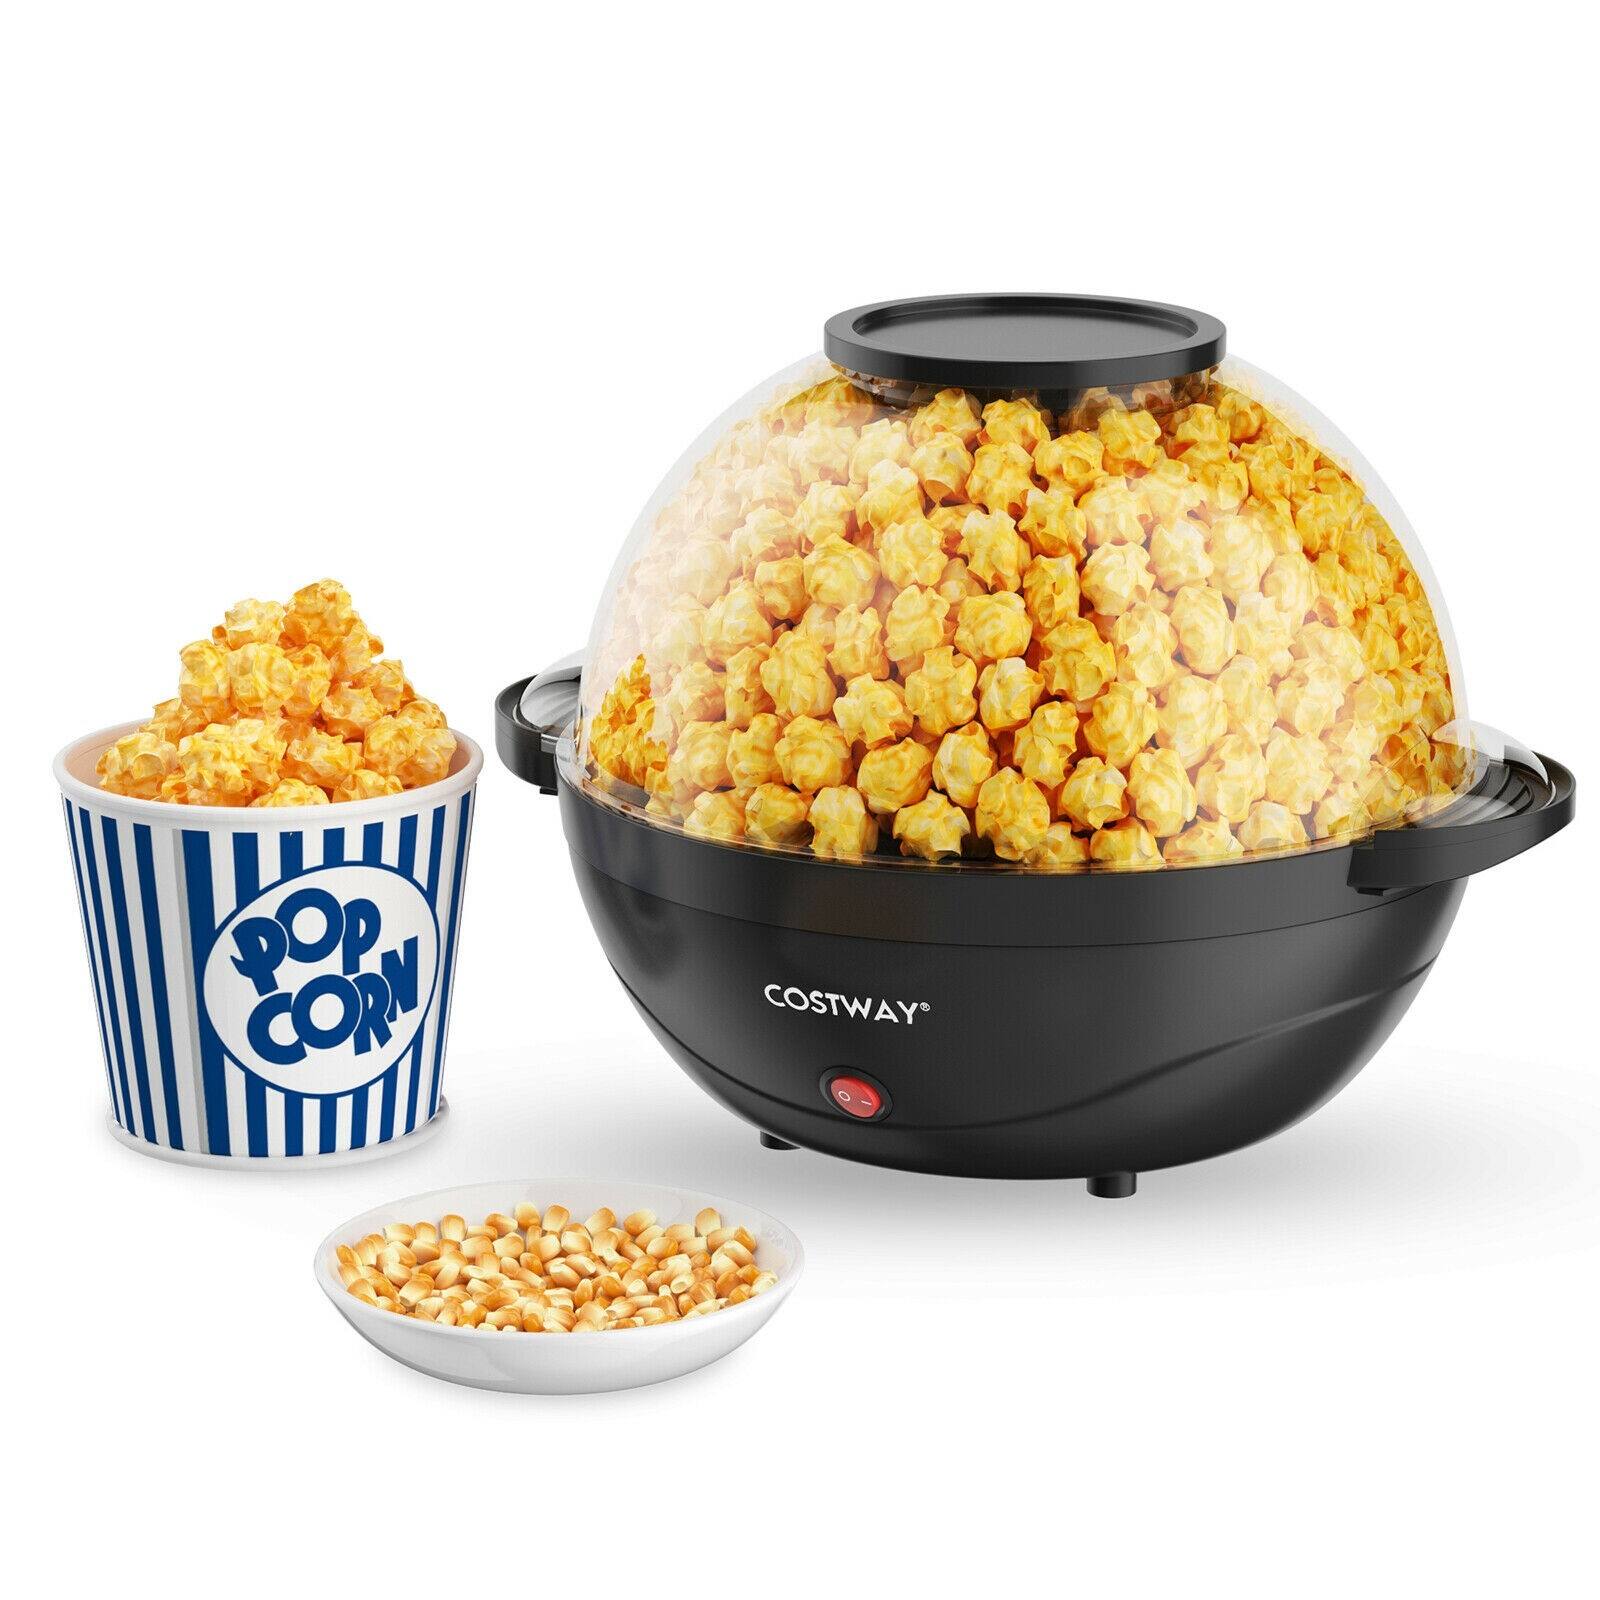 Costway 6QT Stirring Popcorn Popper Maker with Nonstick Plate $39 + Free Shipping